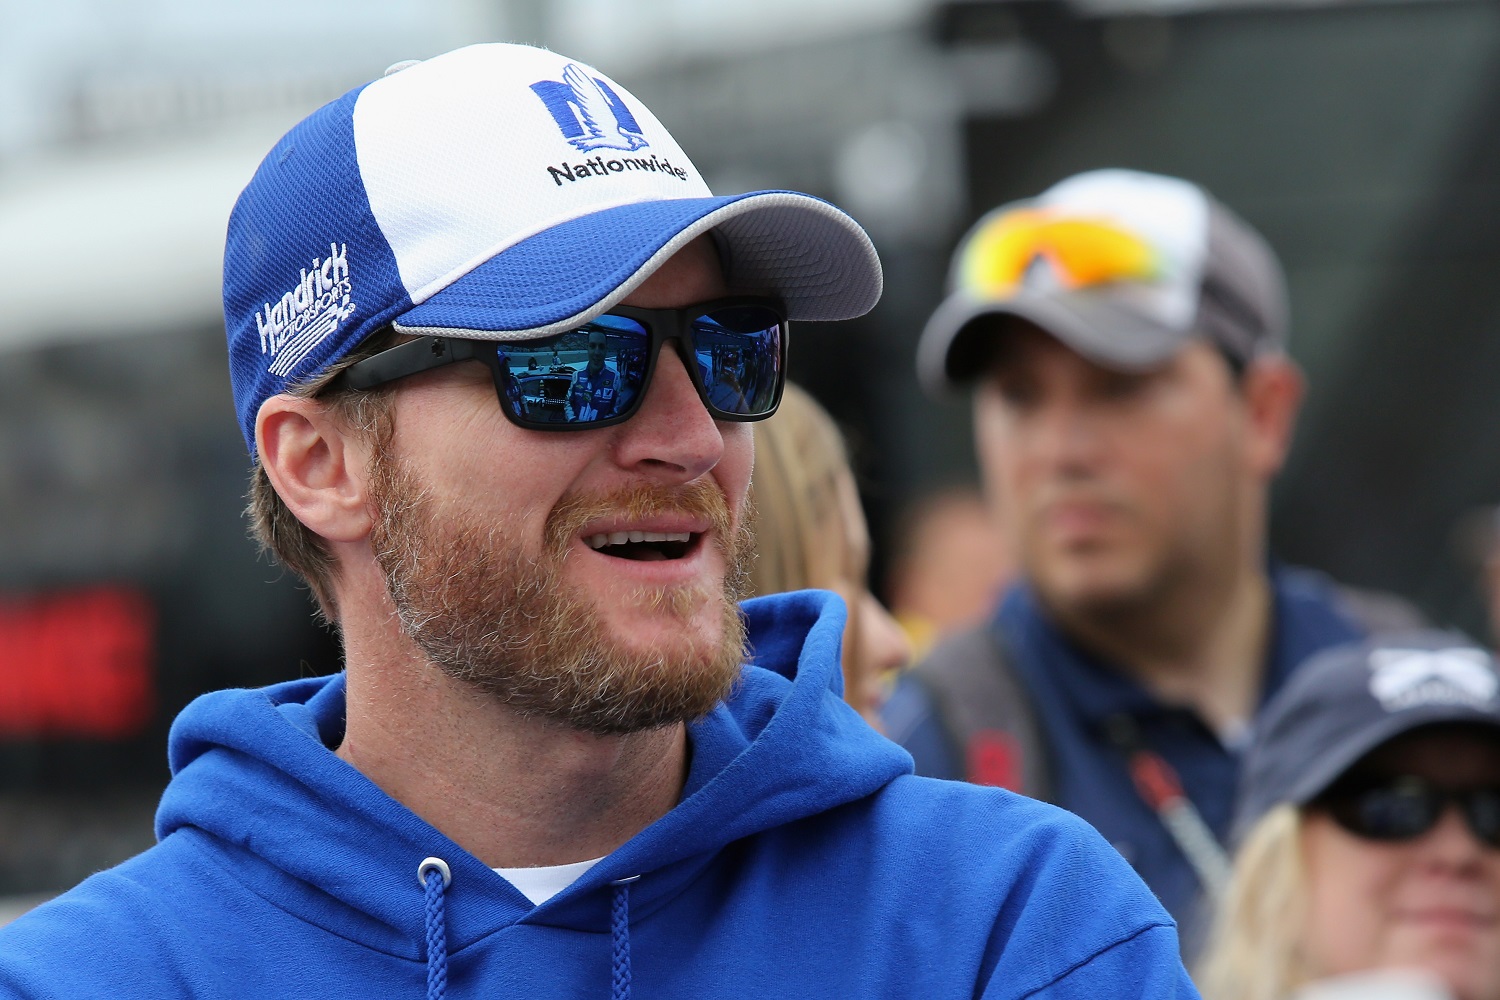 Dale Earnhardt Jr. didn't get written up, but he was pulled over for speeding on his way to a NASCAR race in 2016.